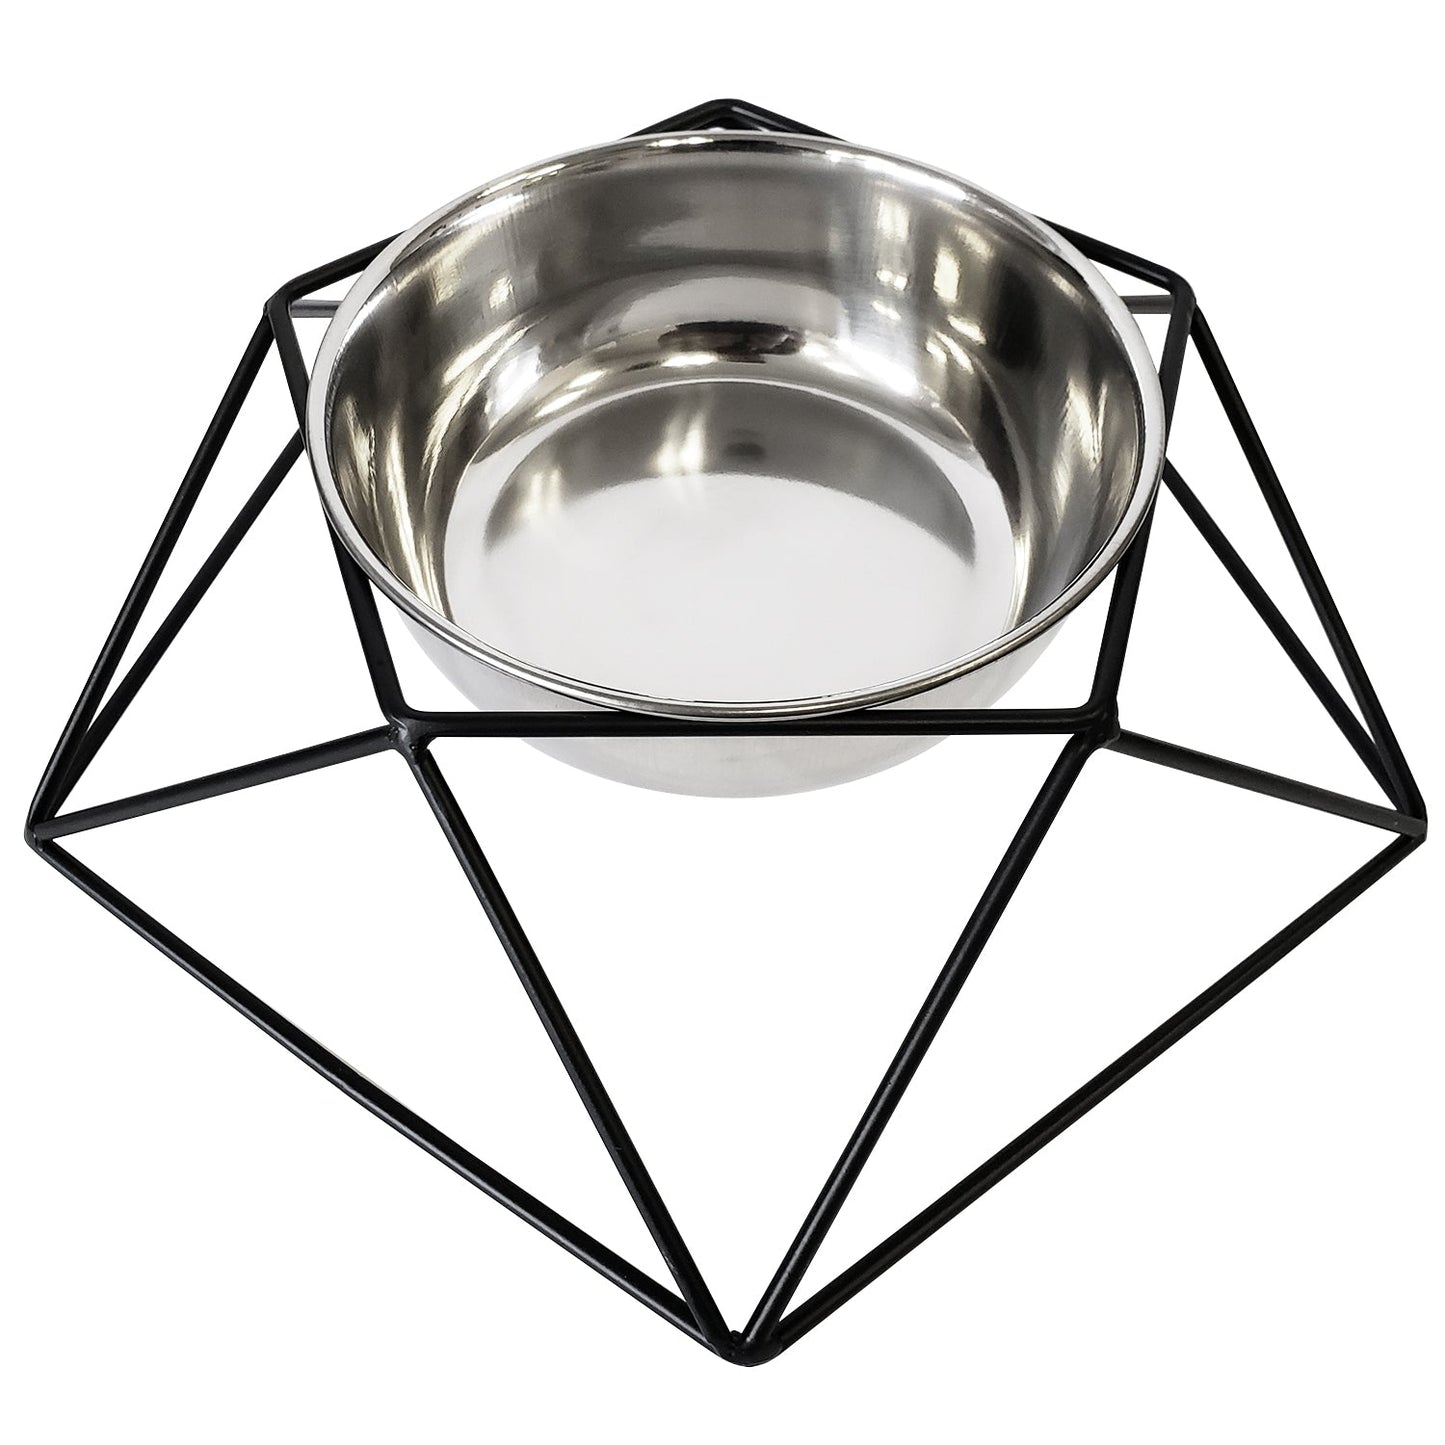 Country Living Modern Hexagonal Black Geometric Dog Feeder with Stainless Steel Bowl